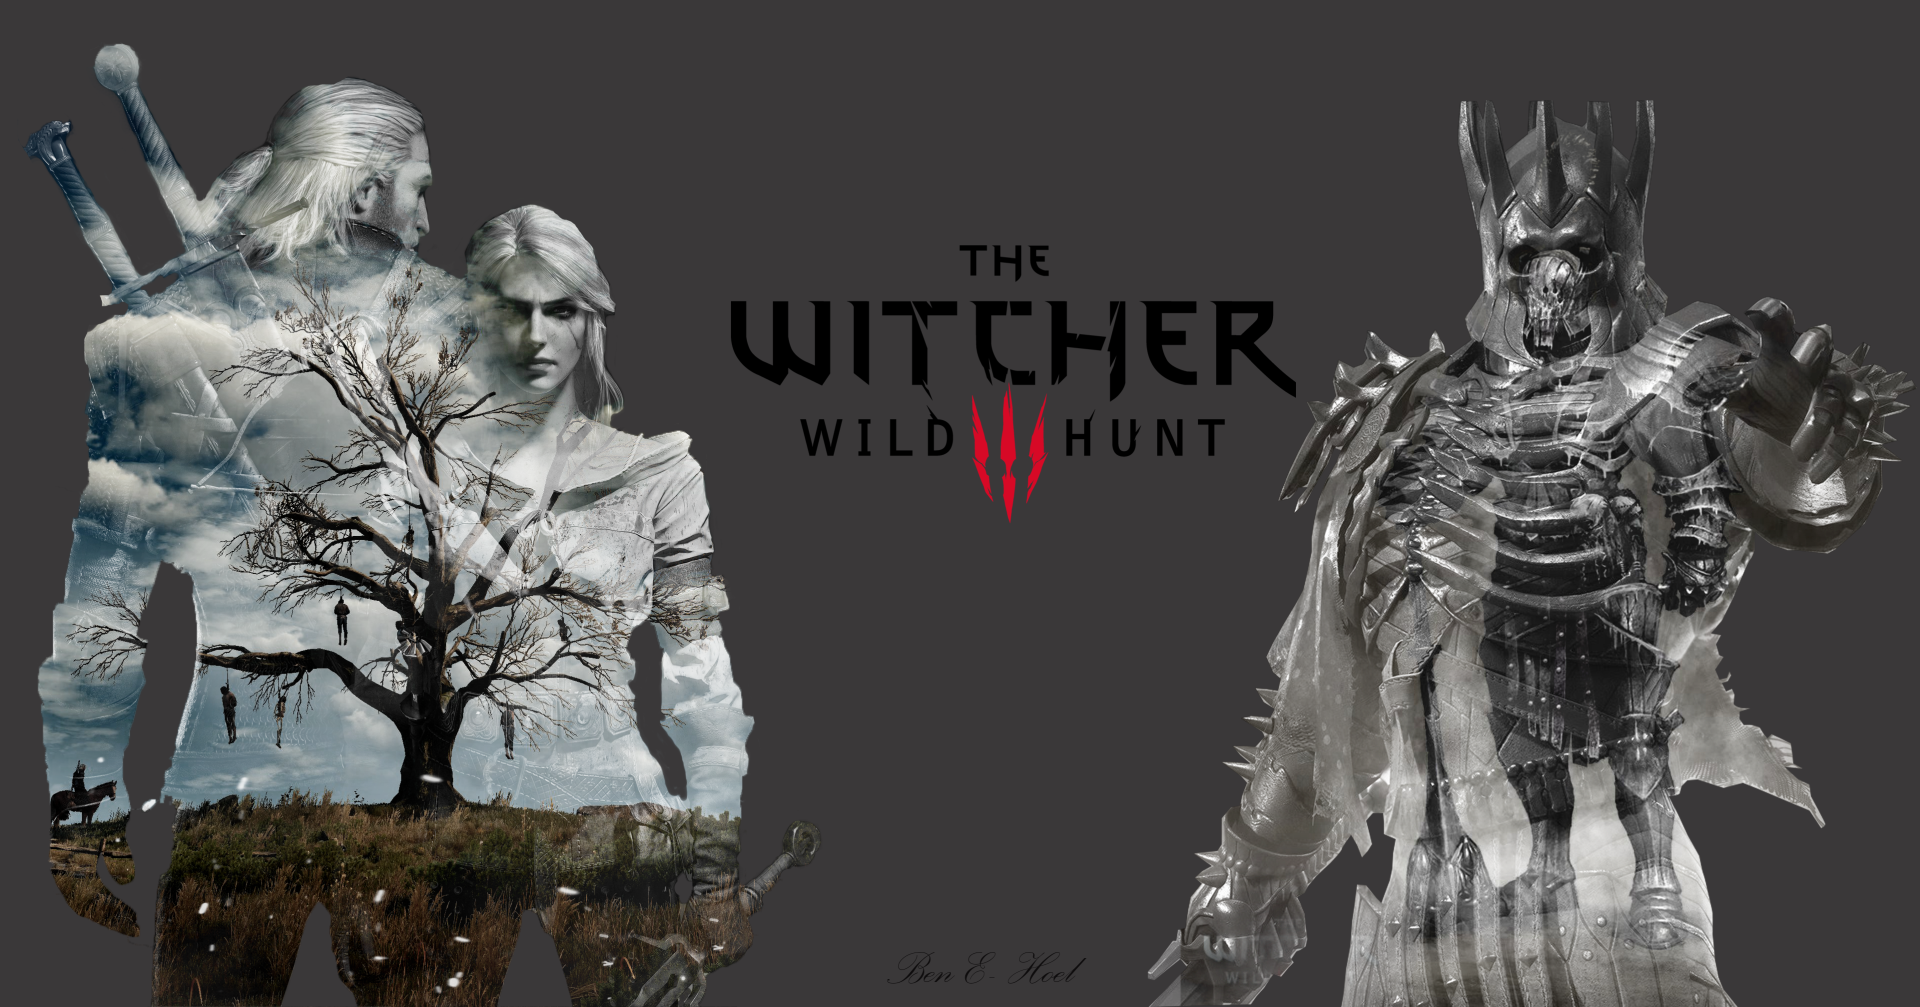 the witcher 3 blood and wine wallpaper,fictional character,batman,superhero,graphic design,digital compositing